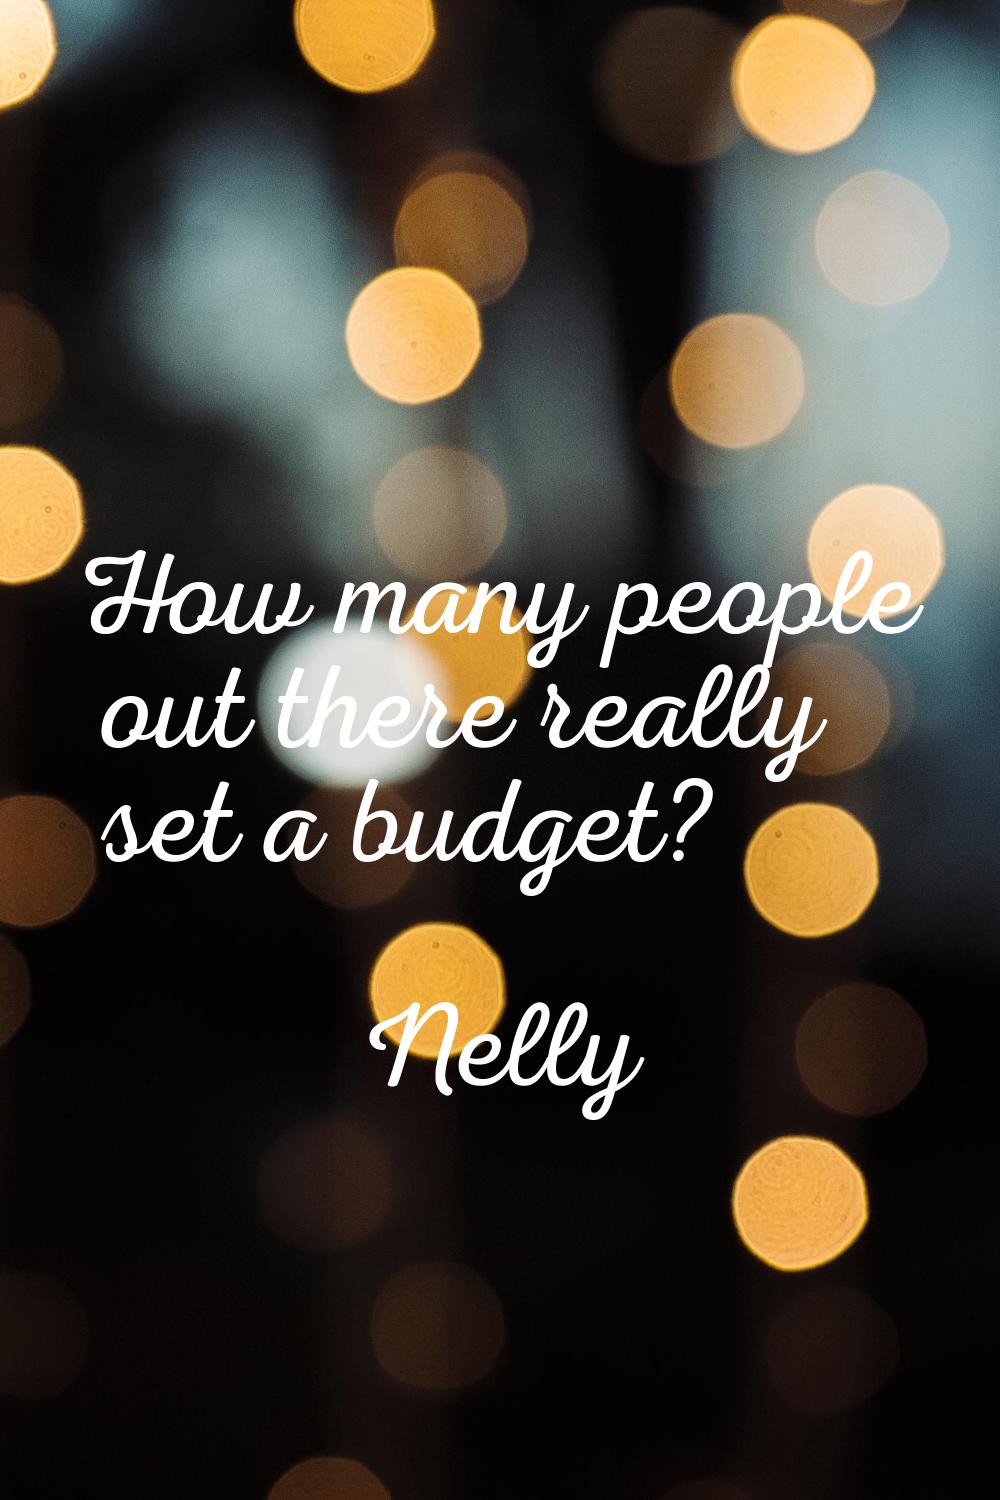 How many people out there really set a budget?